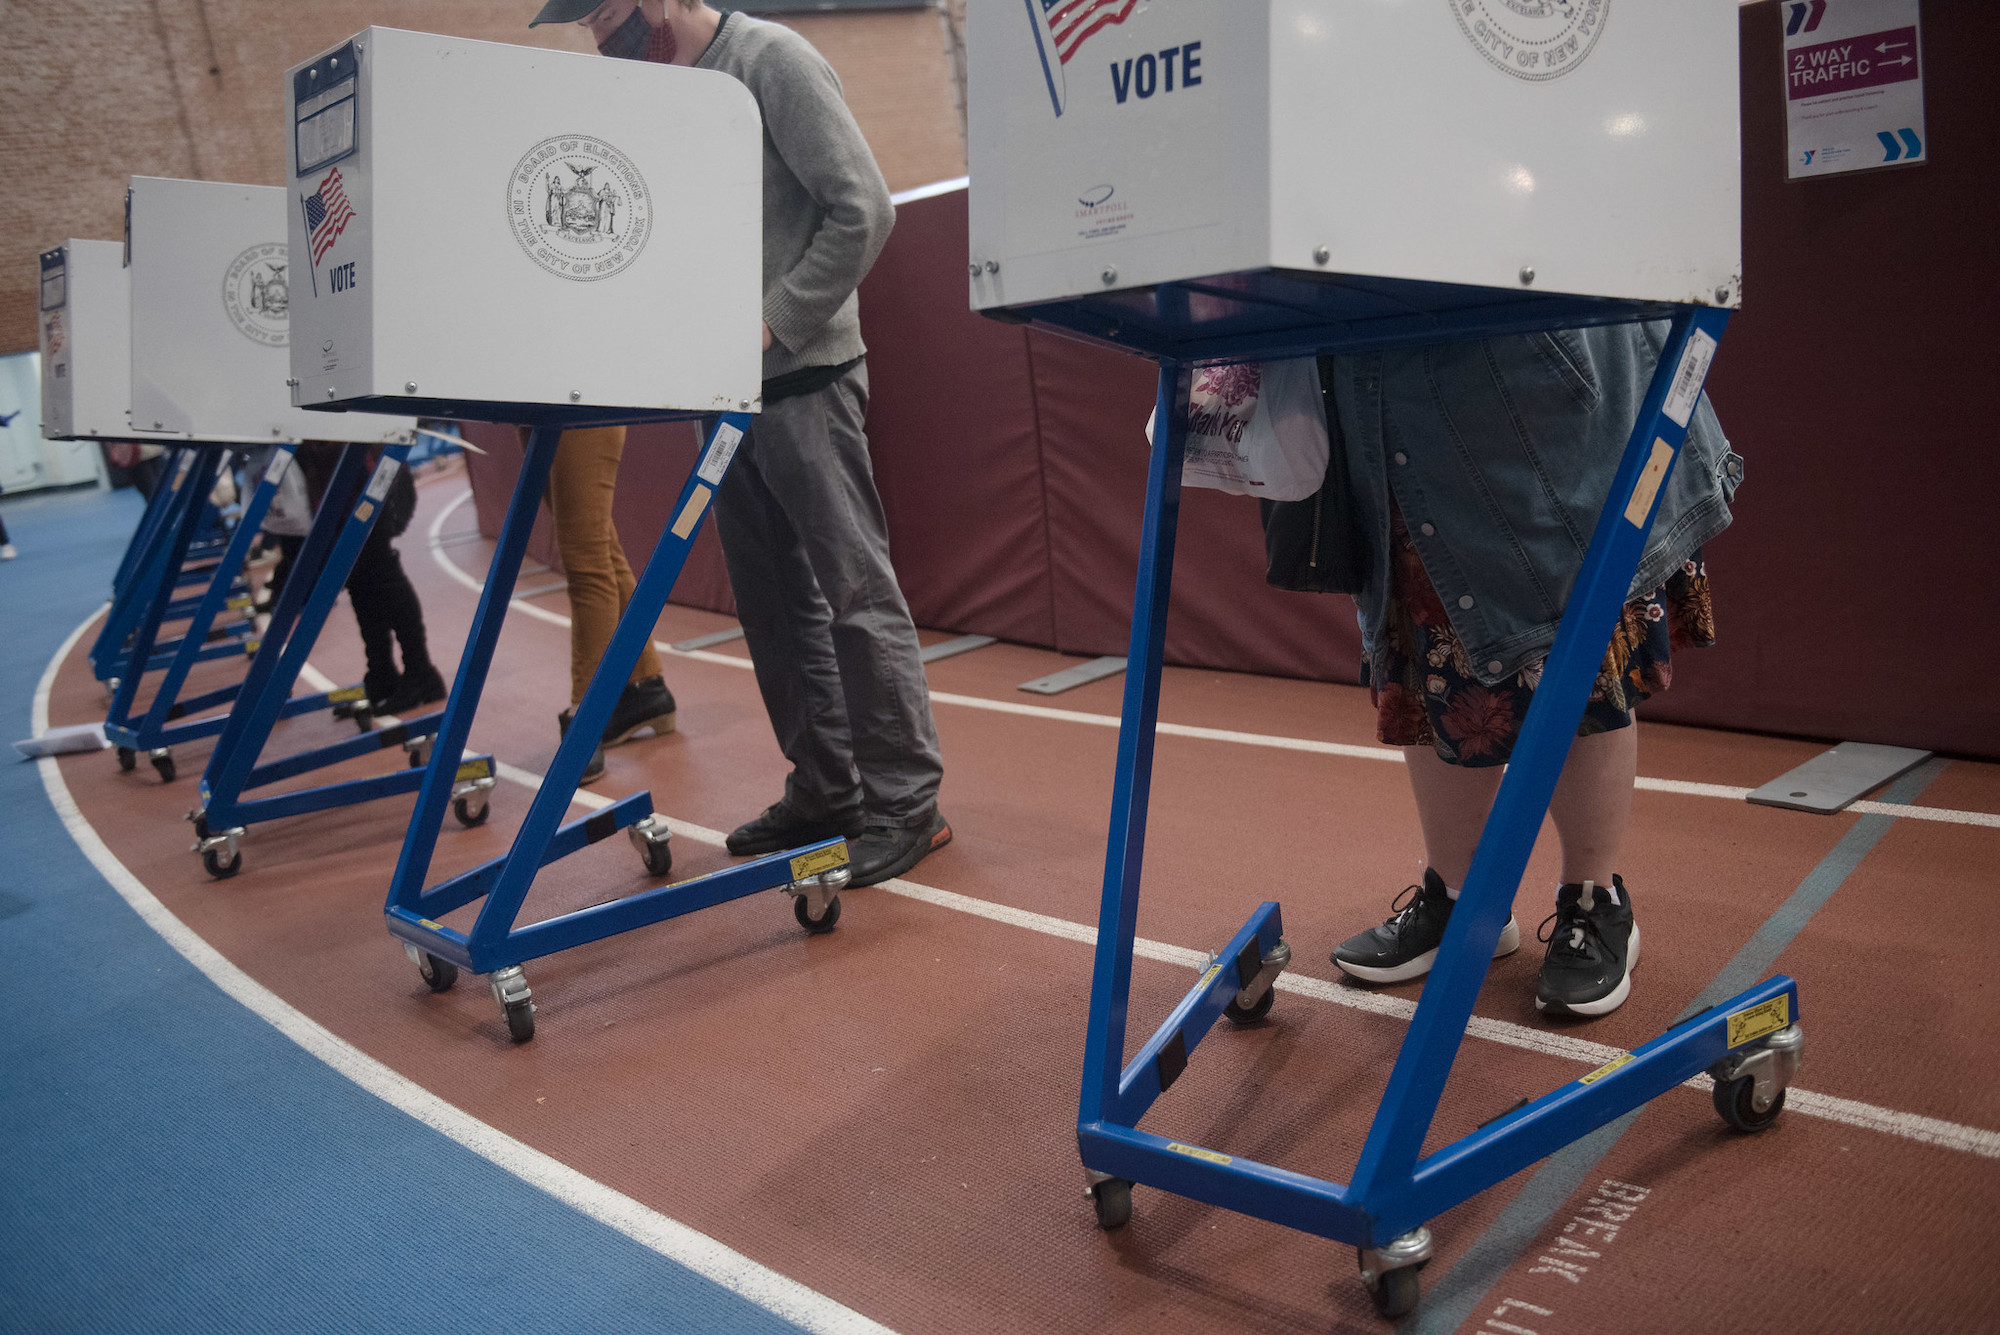 Voters stand and vote during the 2020 election.